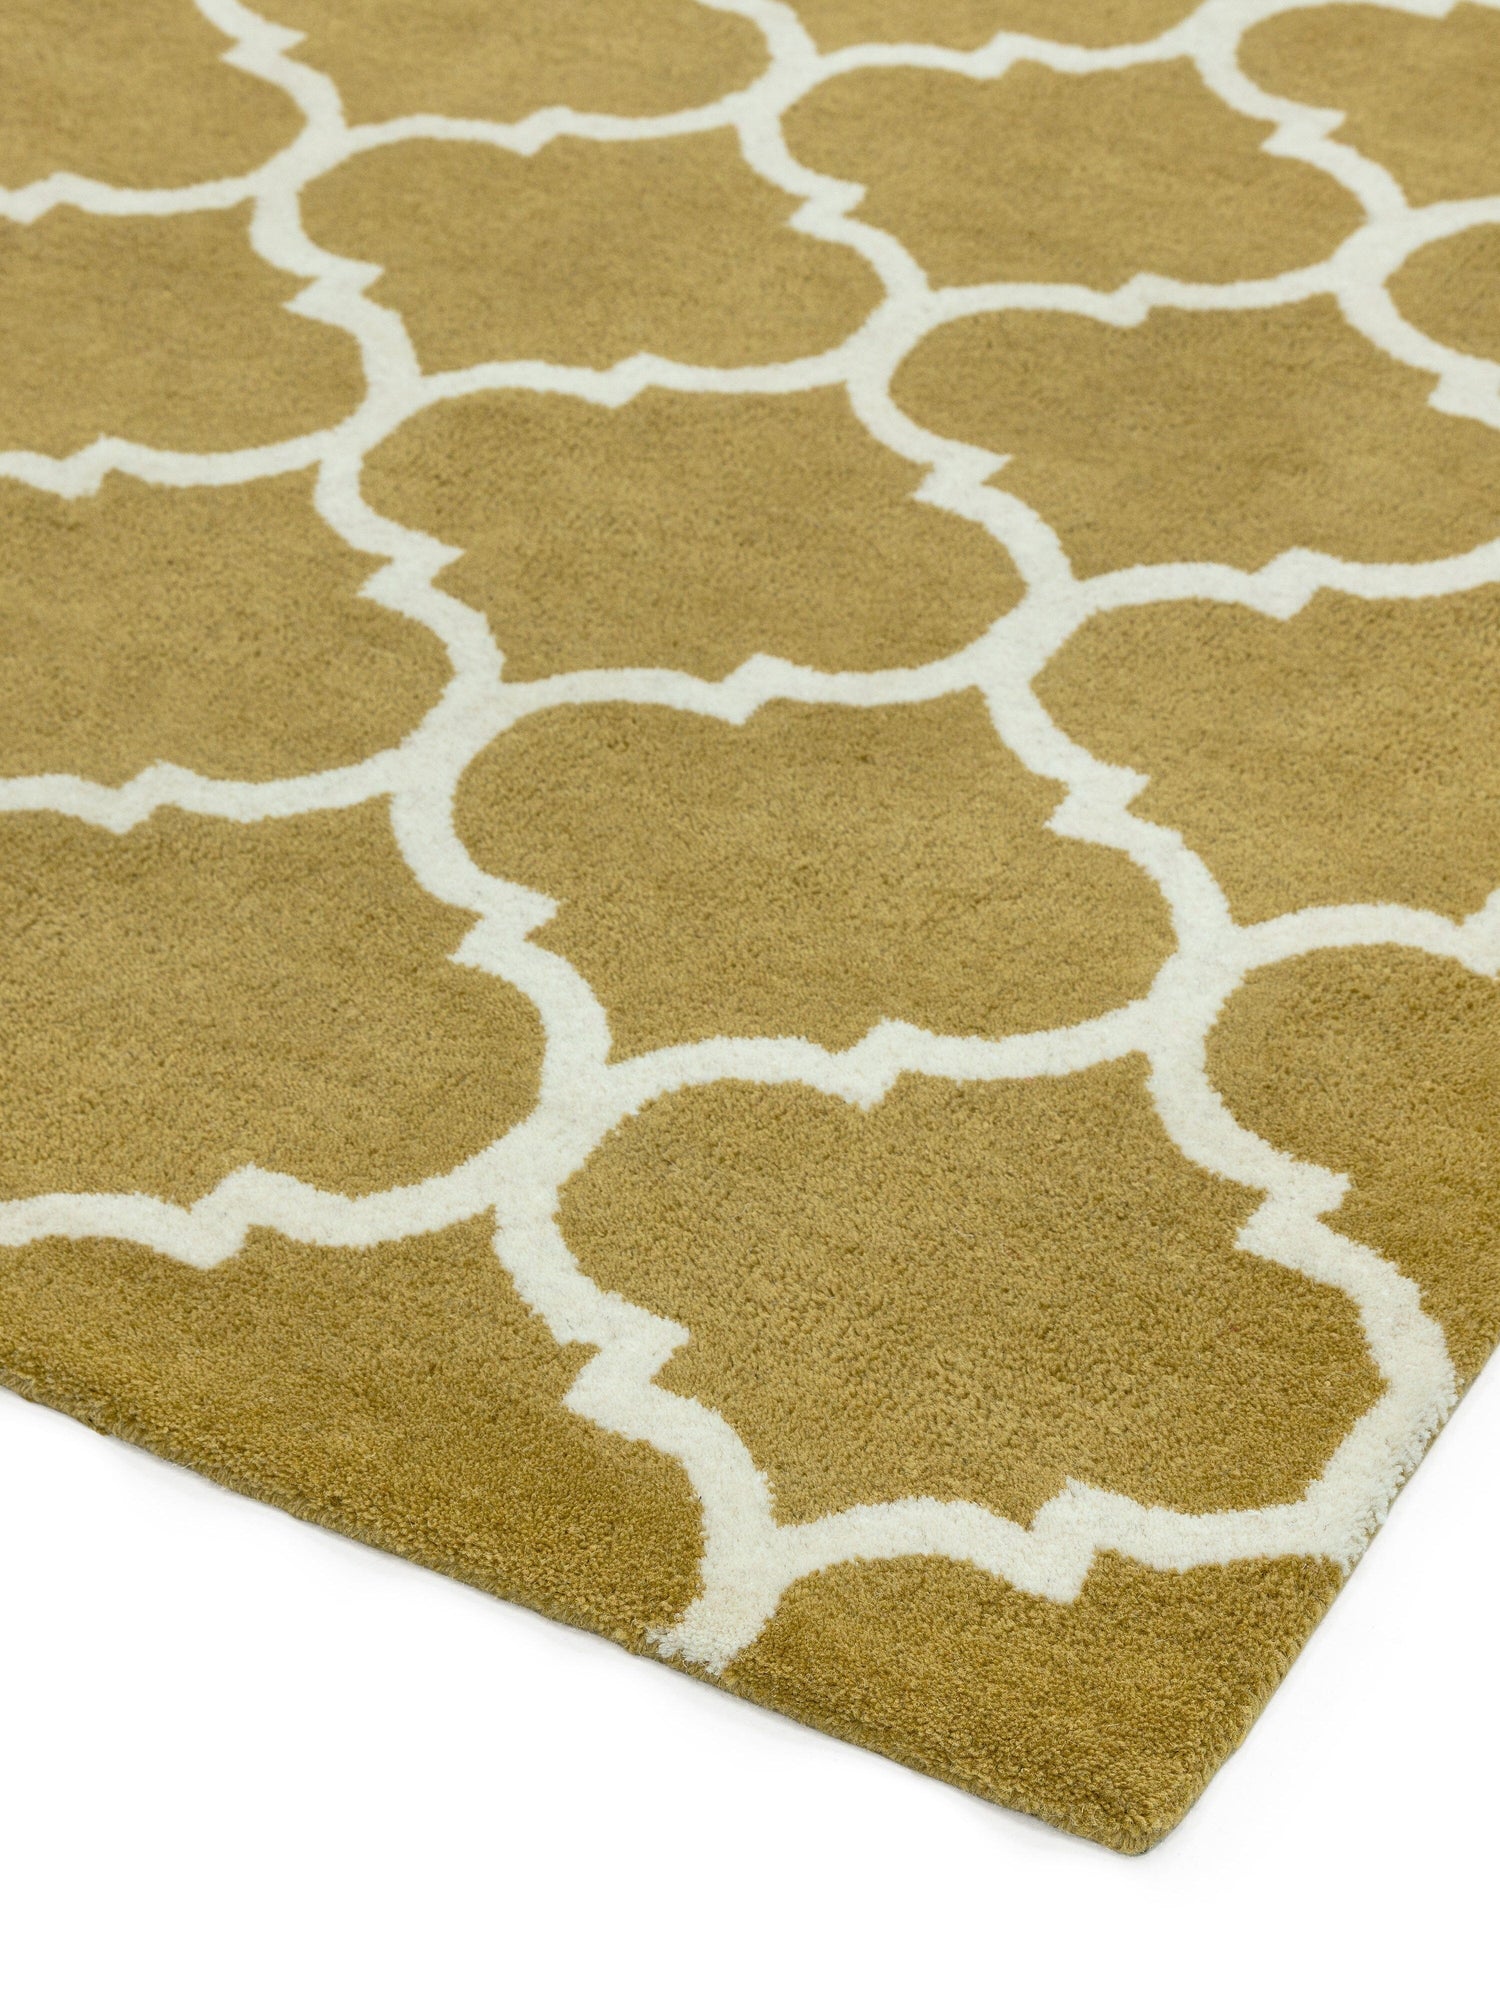  Asiatic Carpets-Asiatic Carpets Albany Handtufted Rug Ogee Ochre - 160 x 230cm-Yellow, Gold 021 